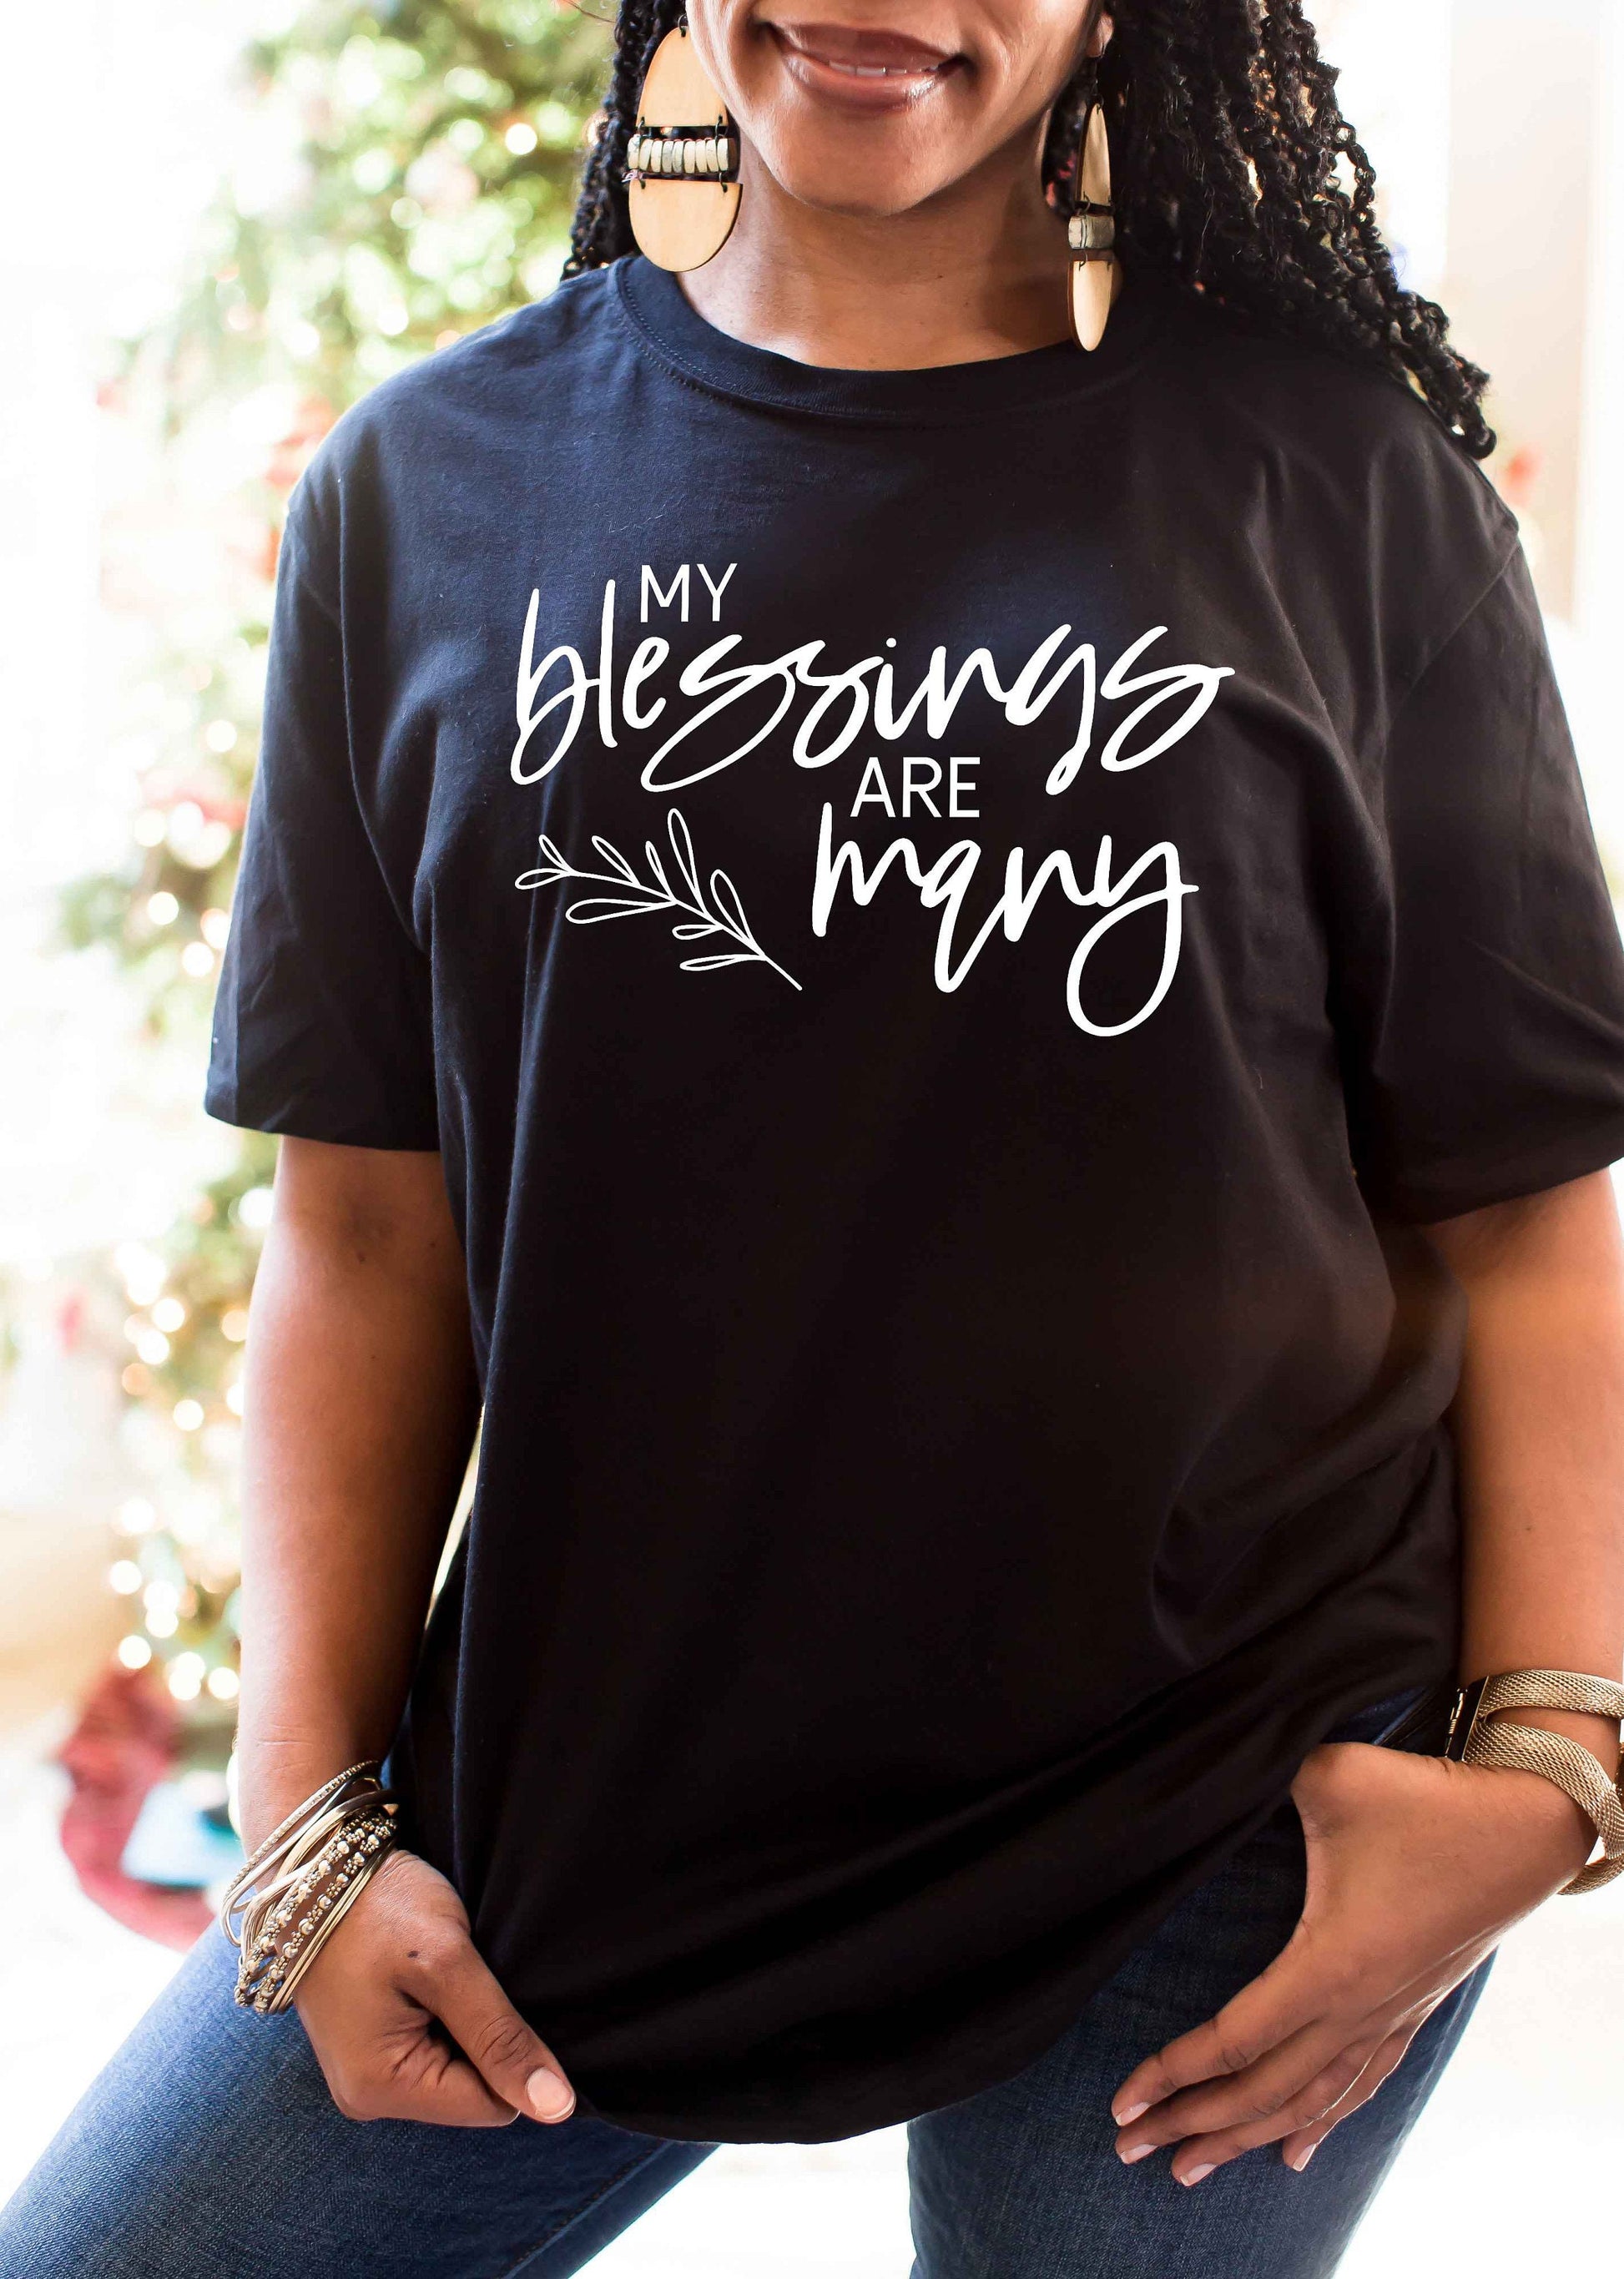 My Blessings are Many unisex t-shirt -  Thankful and Blessed - Shirt for Grandma - Blessed Mama